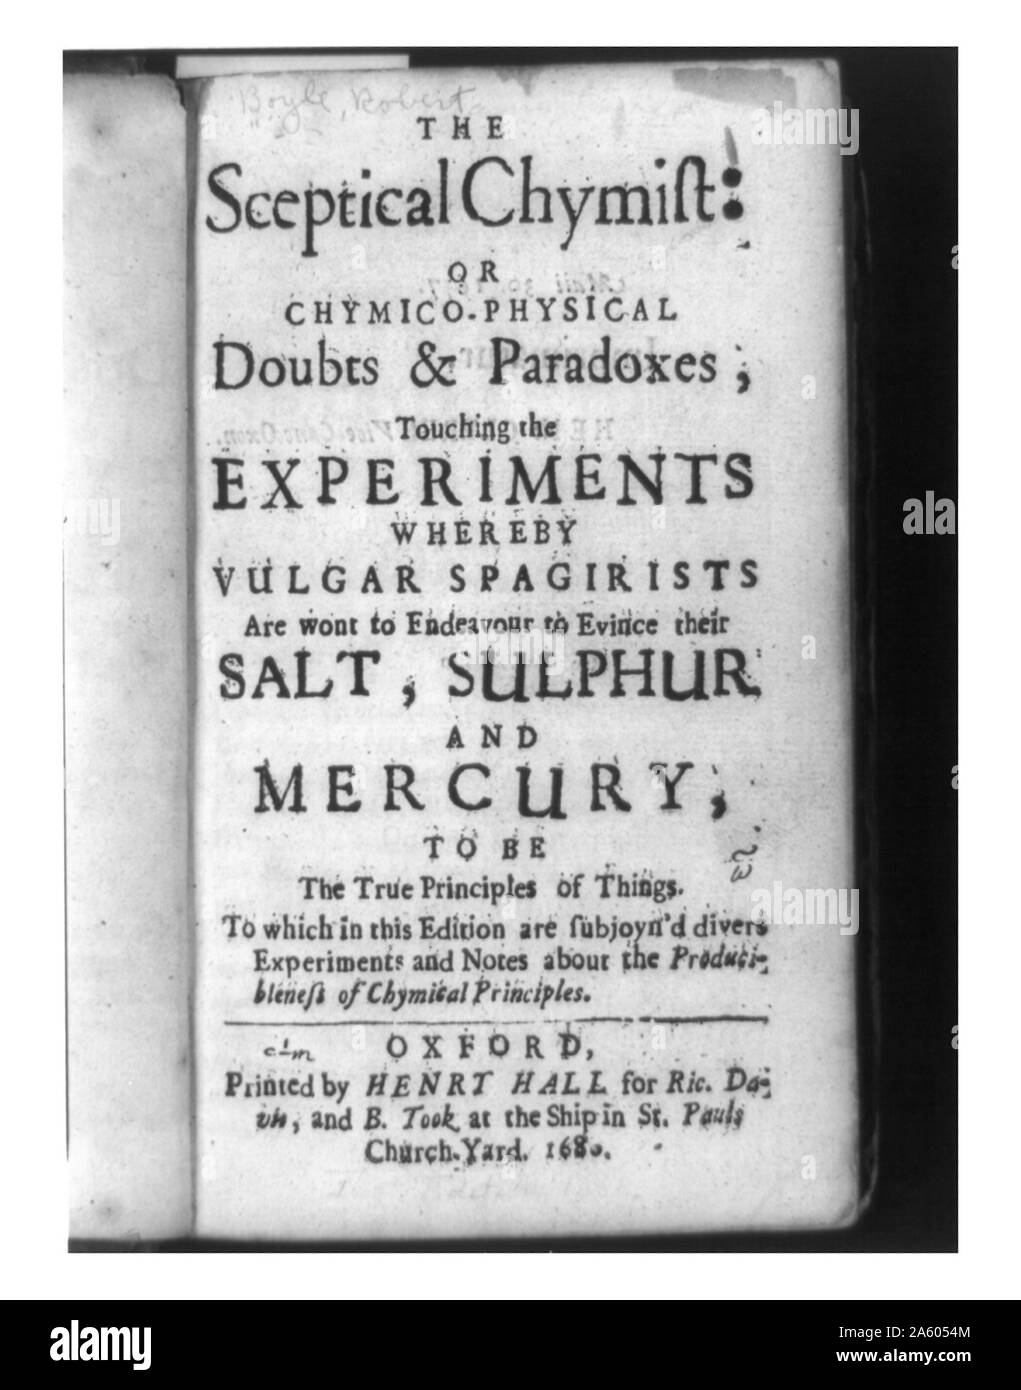 Title page of The Sceptical Chymist, 1680. Robert Boyle's book that presented his hypothesis that matter consisted of atoms and clusters of atoms in motion and that every phenomenon was the result of collisions of particles in motion. Stock Photo